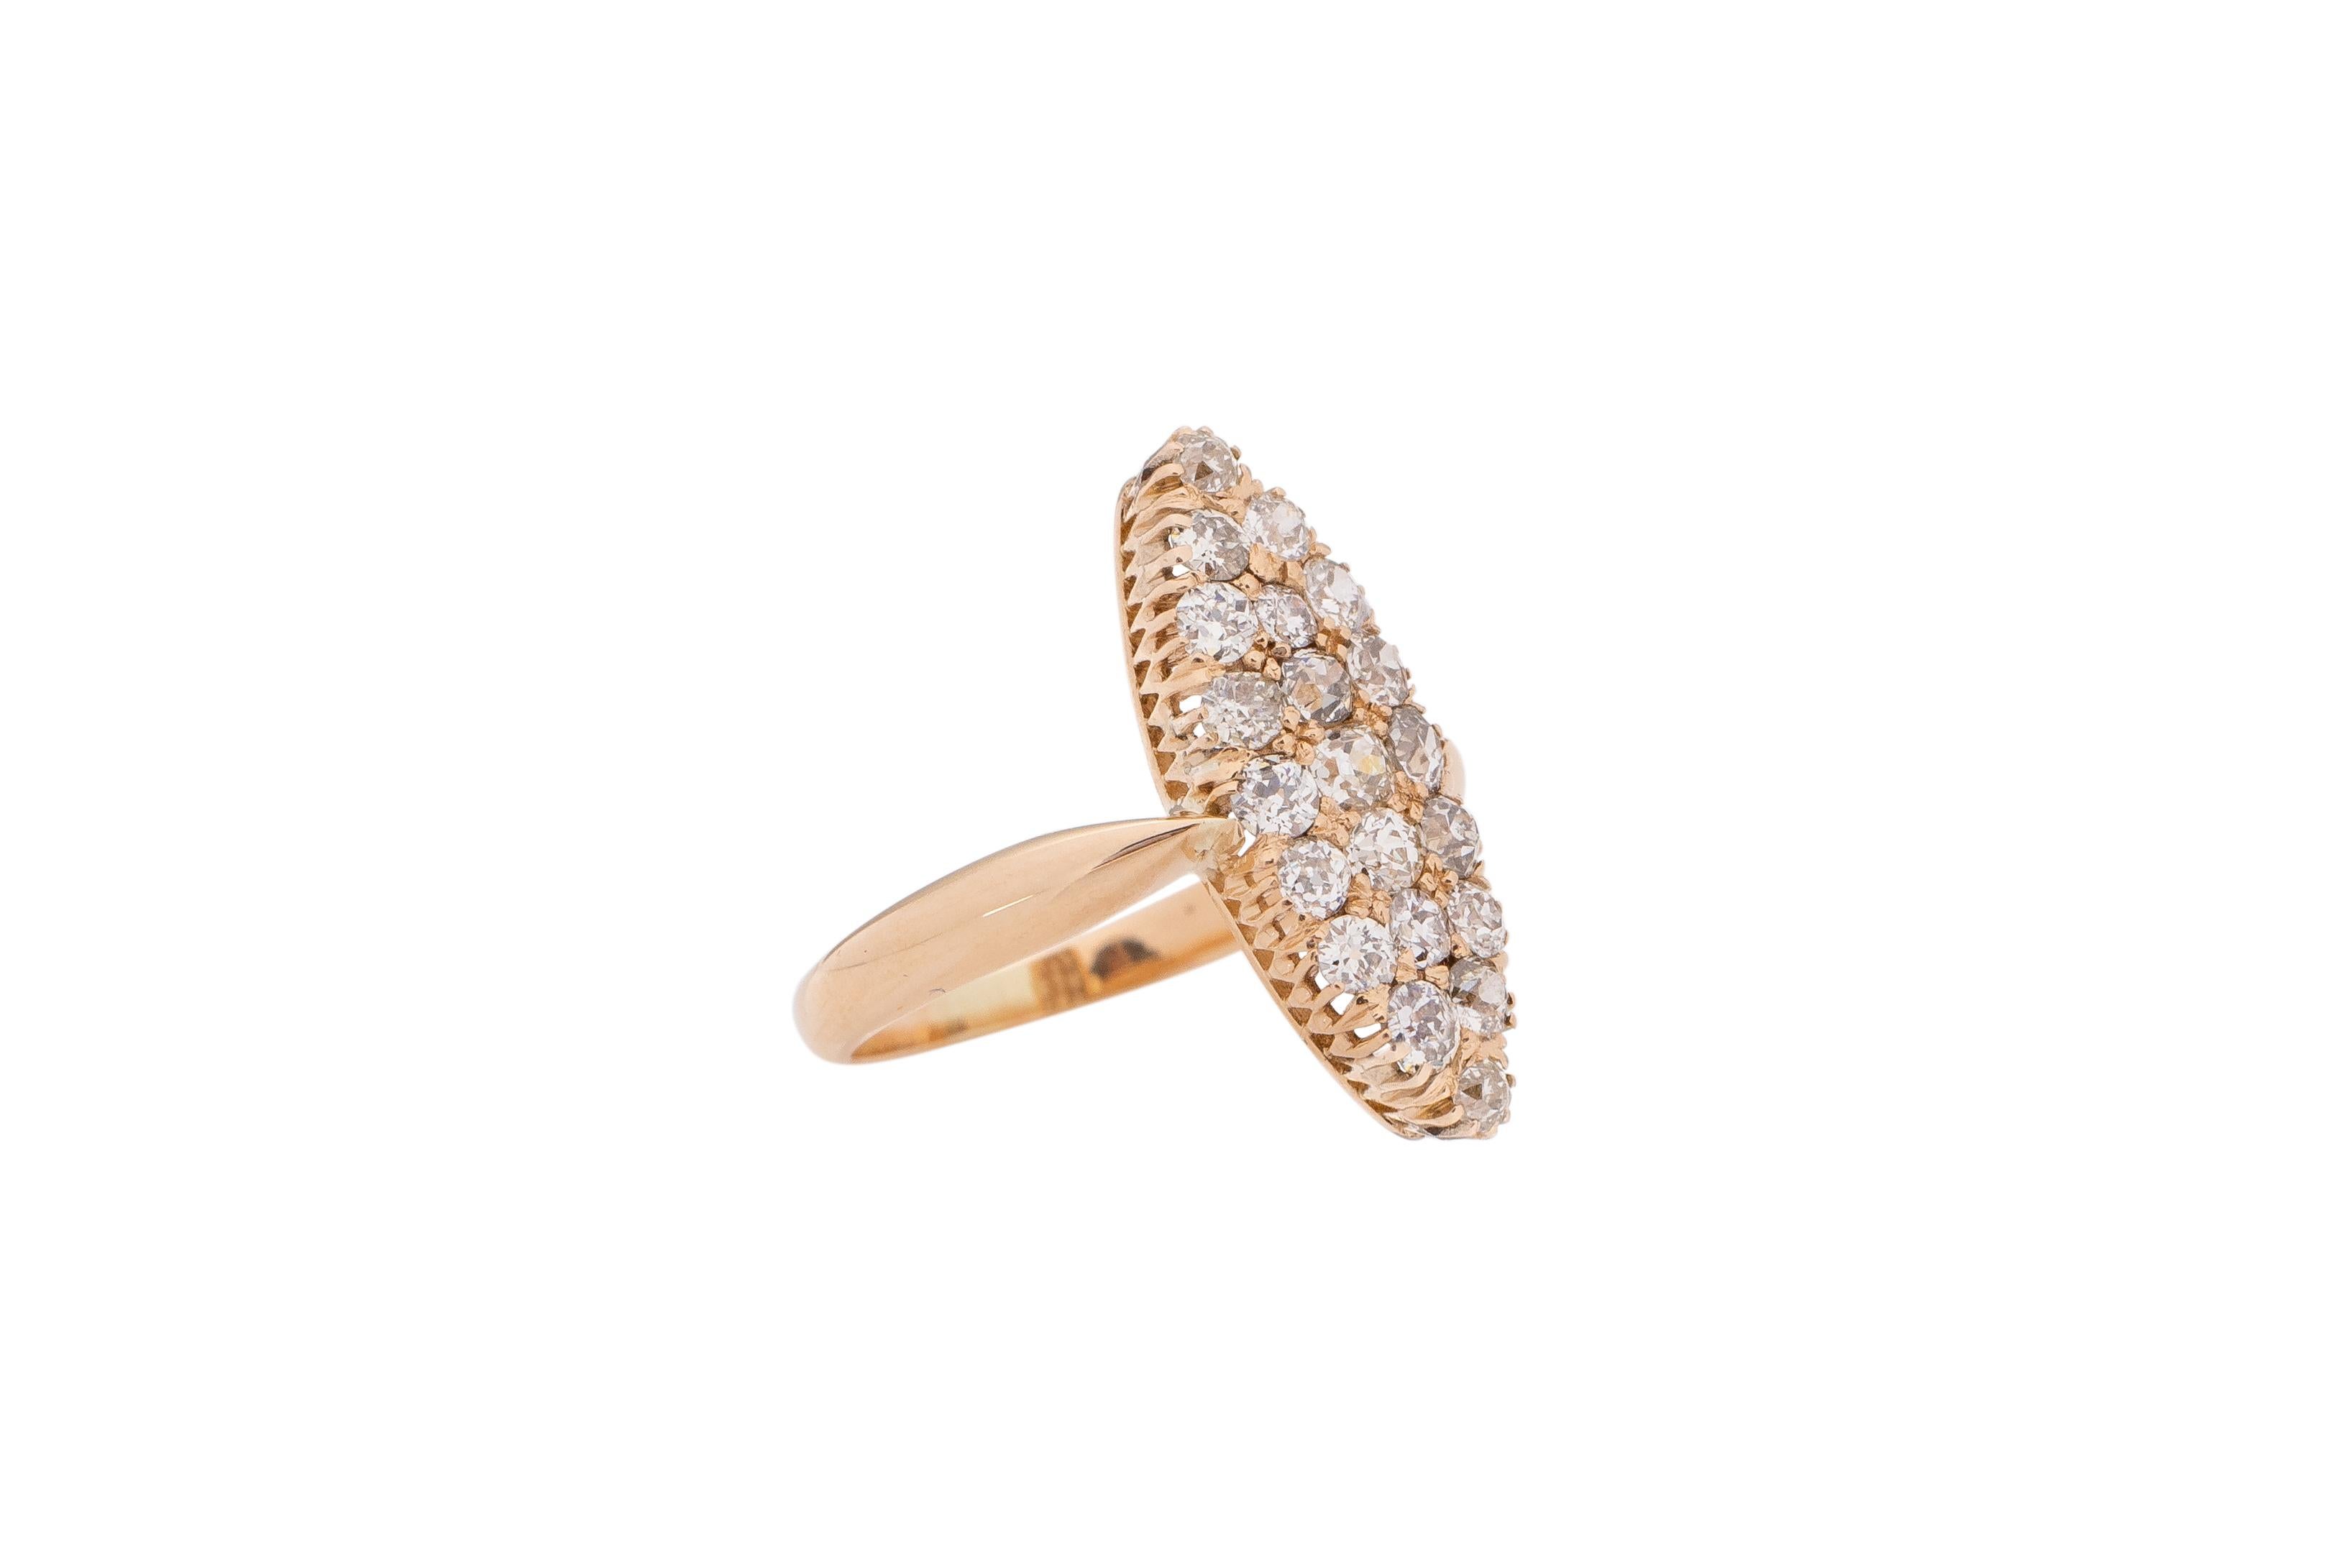 Ring Size: 5.25
Metal Type: 14 Karat Yellow Gold [Hallmarked, and Tested]
Weight: 3.0 grams

Diamond Details:
Weight: 1.00 carat
Cut: Old European brilliant
Color: G-H
Clarity: VS

Finger to Top of Stone Measurement: 4mm
Condition: Excellent